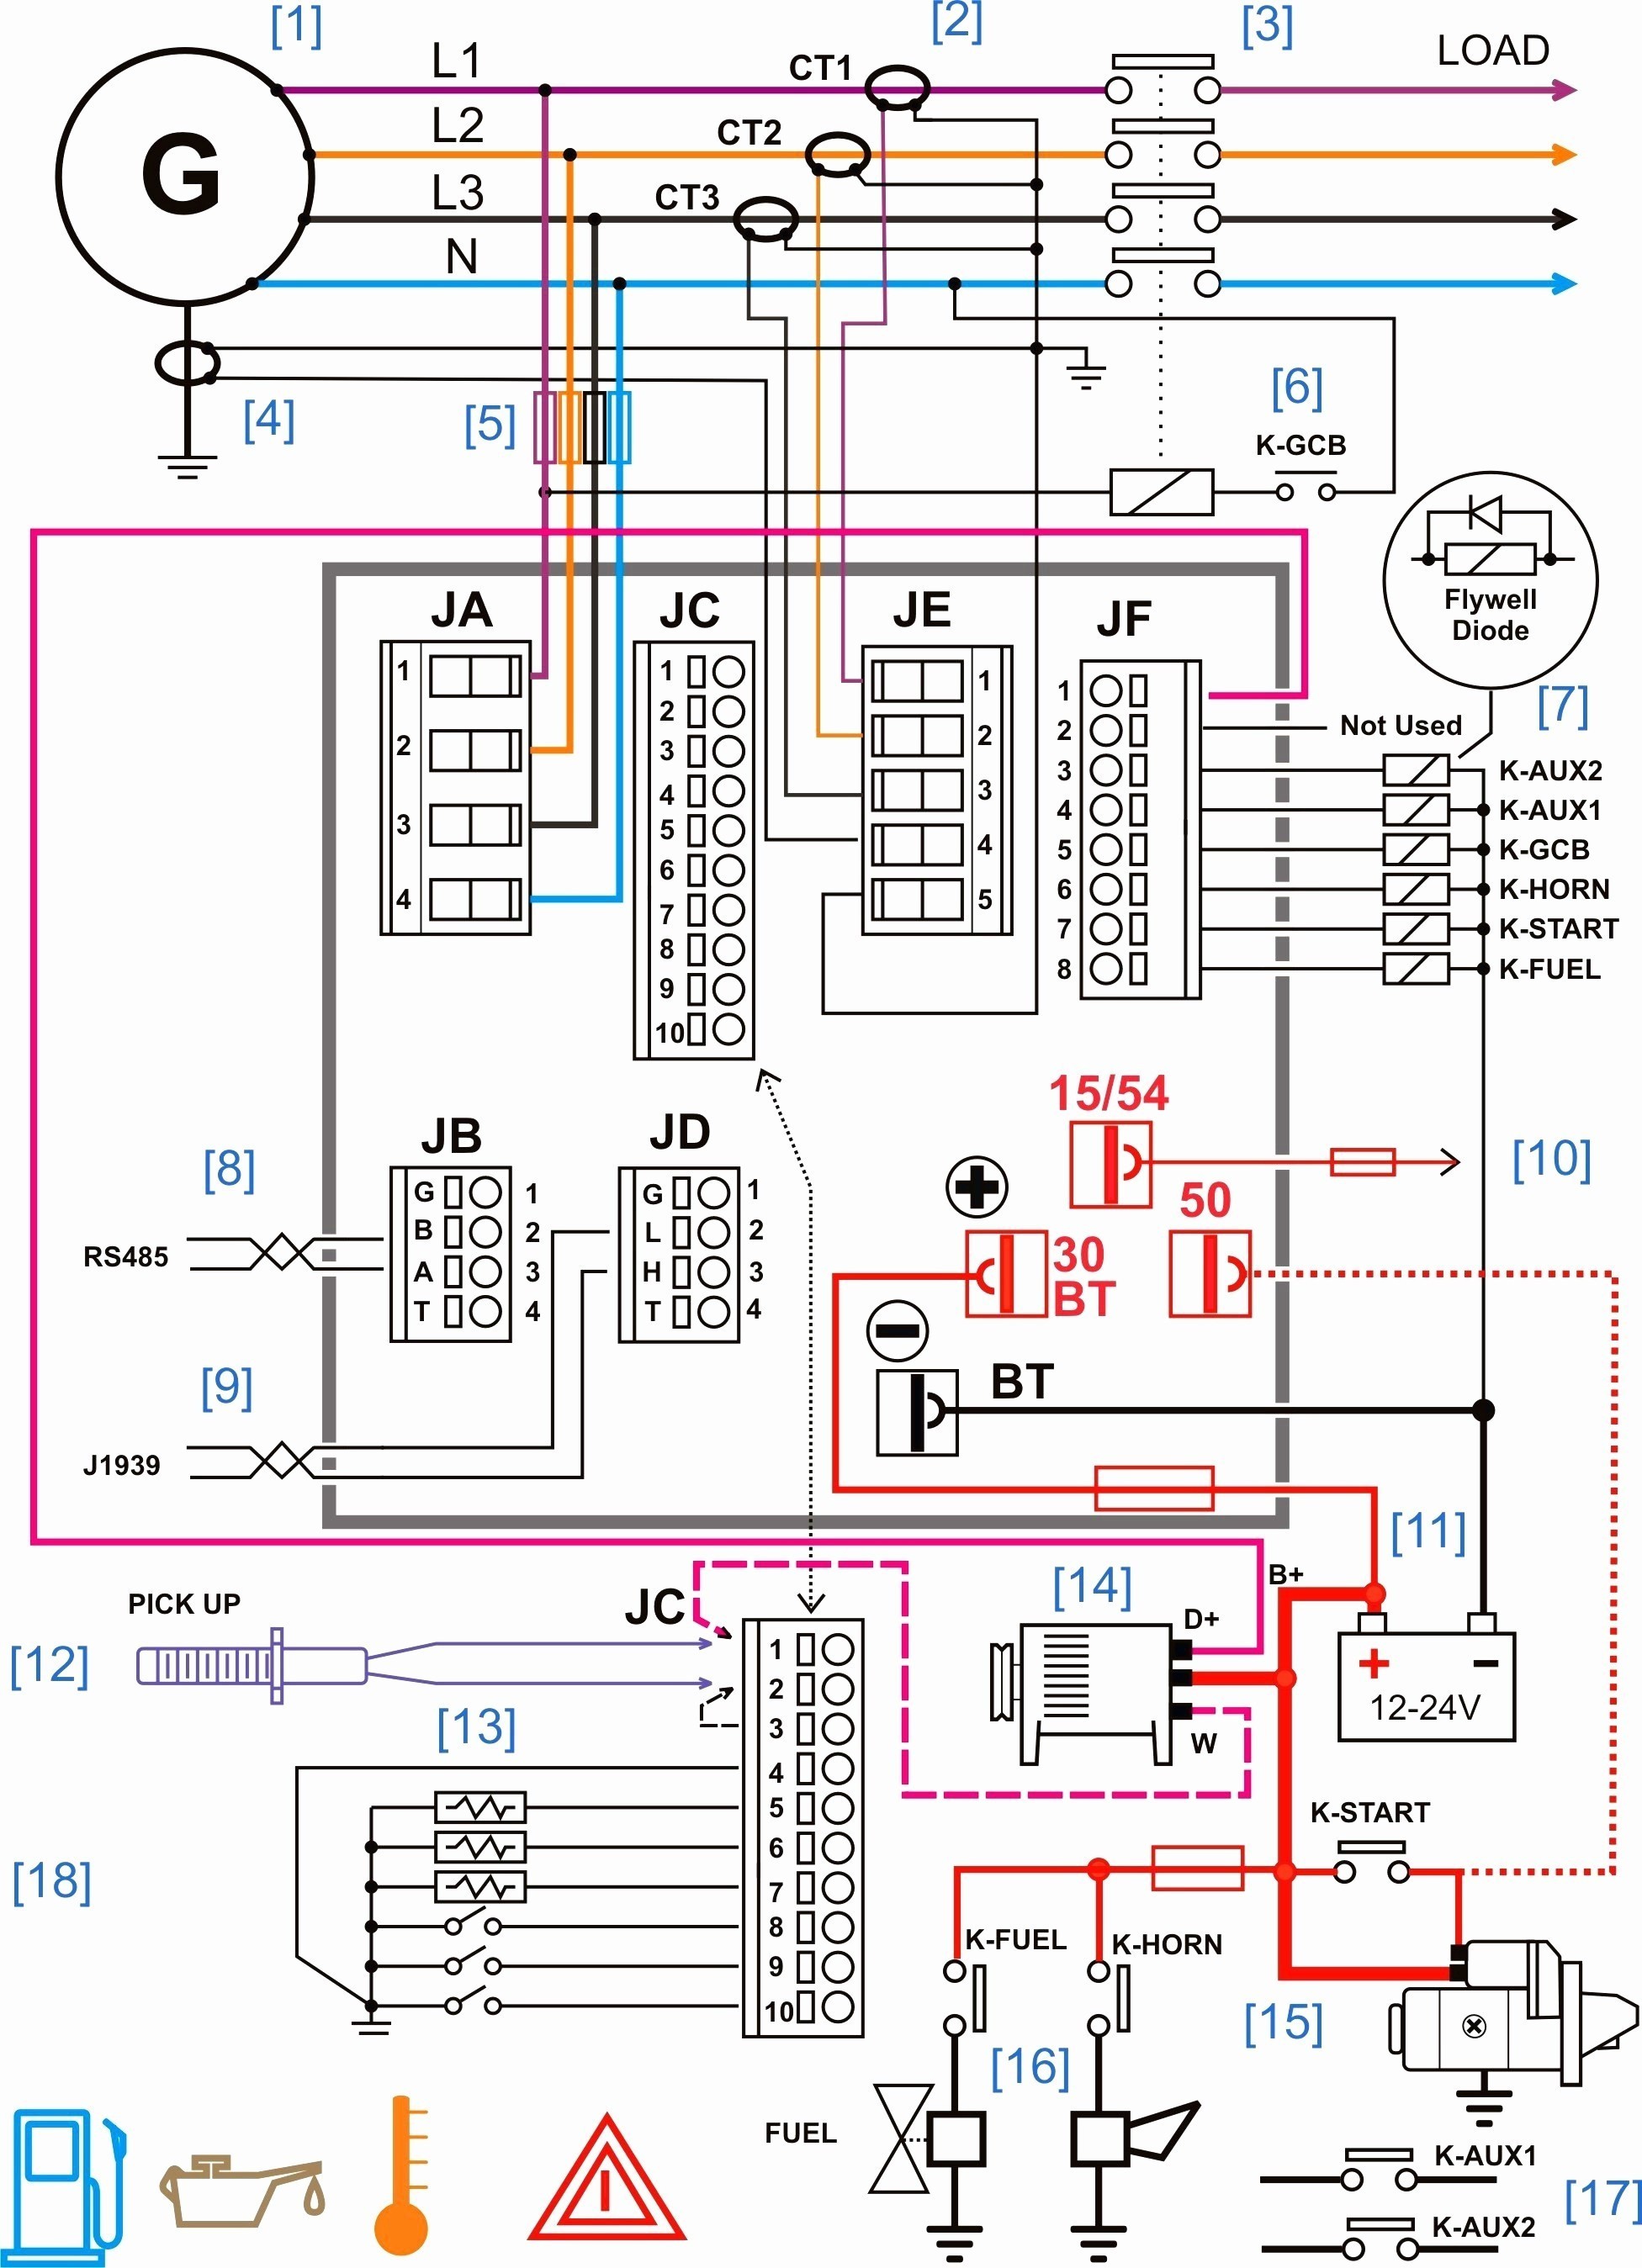 Wiring Diagram Home Electrical Refrence Automotive Wiring Diagram Line Save Best Wiring Diagram Od Rv Park